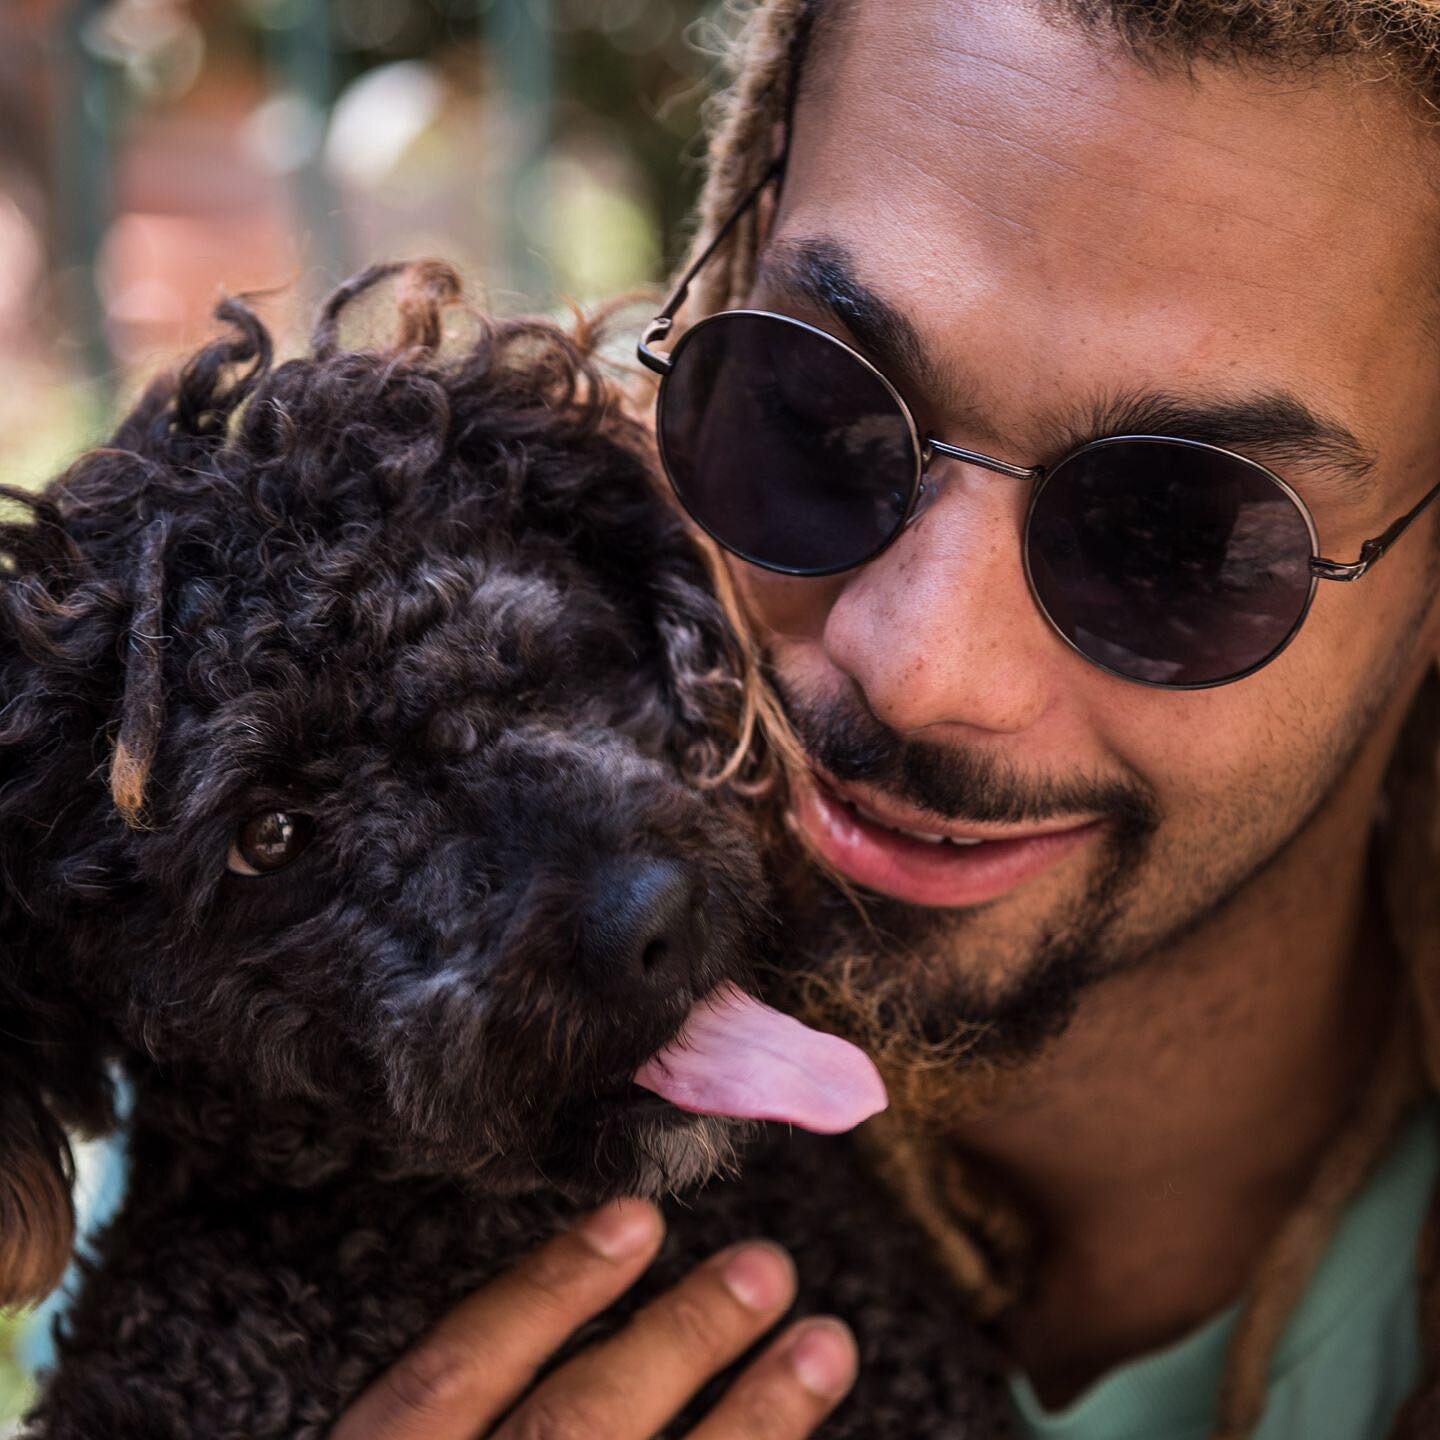 Rendez vous with dancer Geff and rasta poodle Esta
As a child, Geff had animals - gerbils, guinea pigs, a mouse or a goldfish... which he loved but cared for little. Geff's relationship with Esta, a friendly black poodle, contradicts his friends' pre